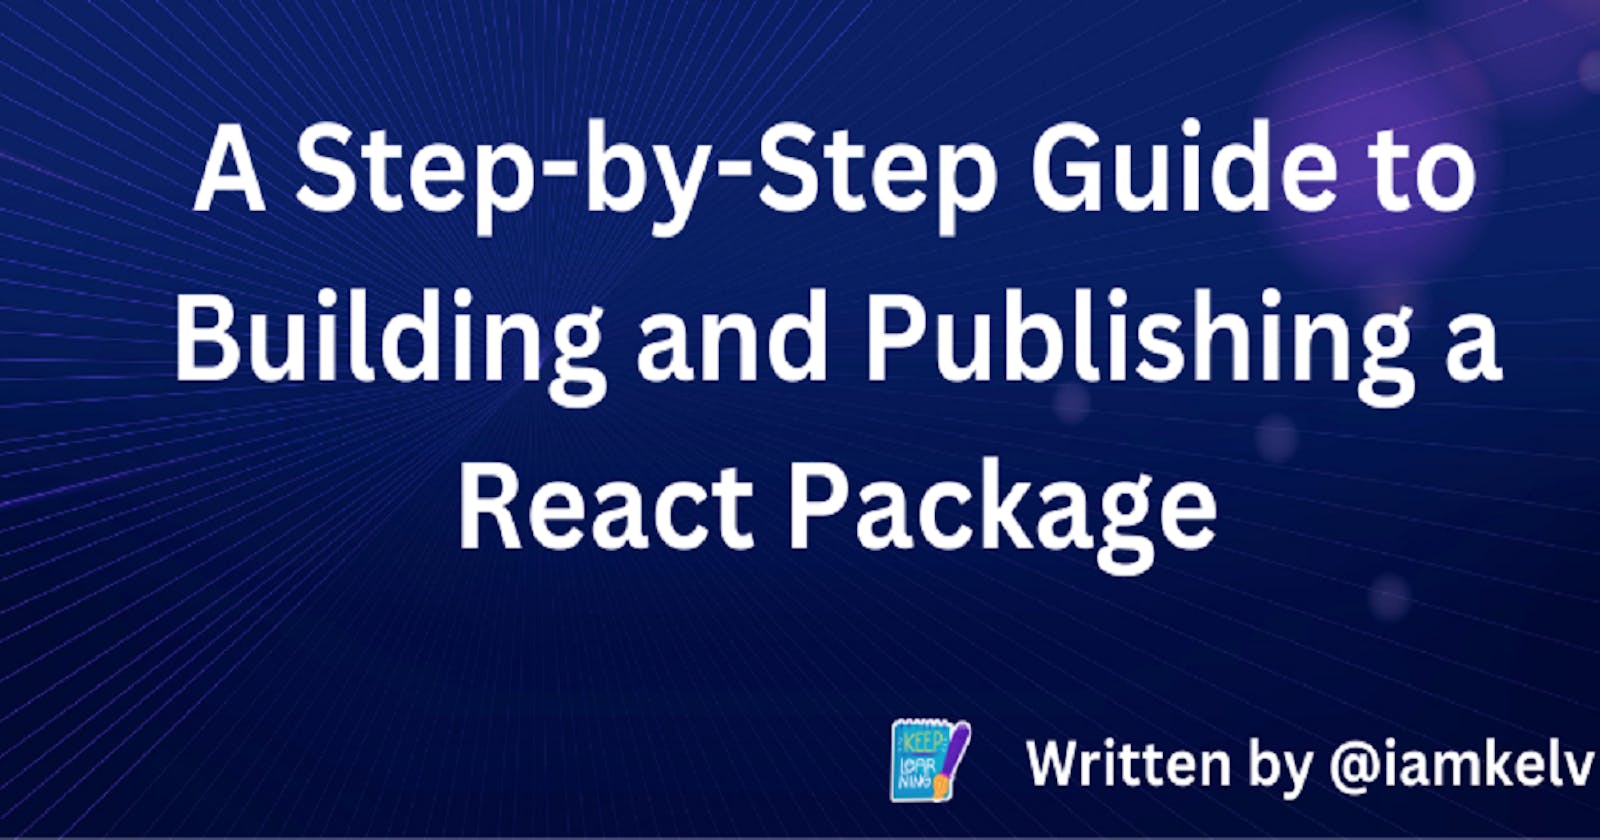 A Step-by-Step Guide to Building and Publishing  a React Package